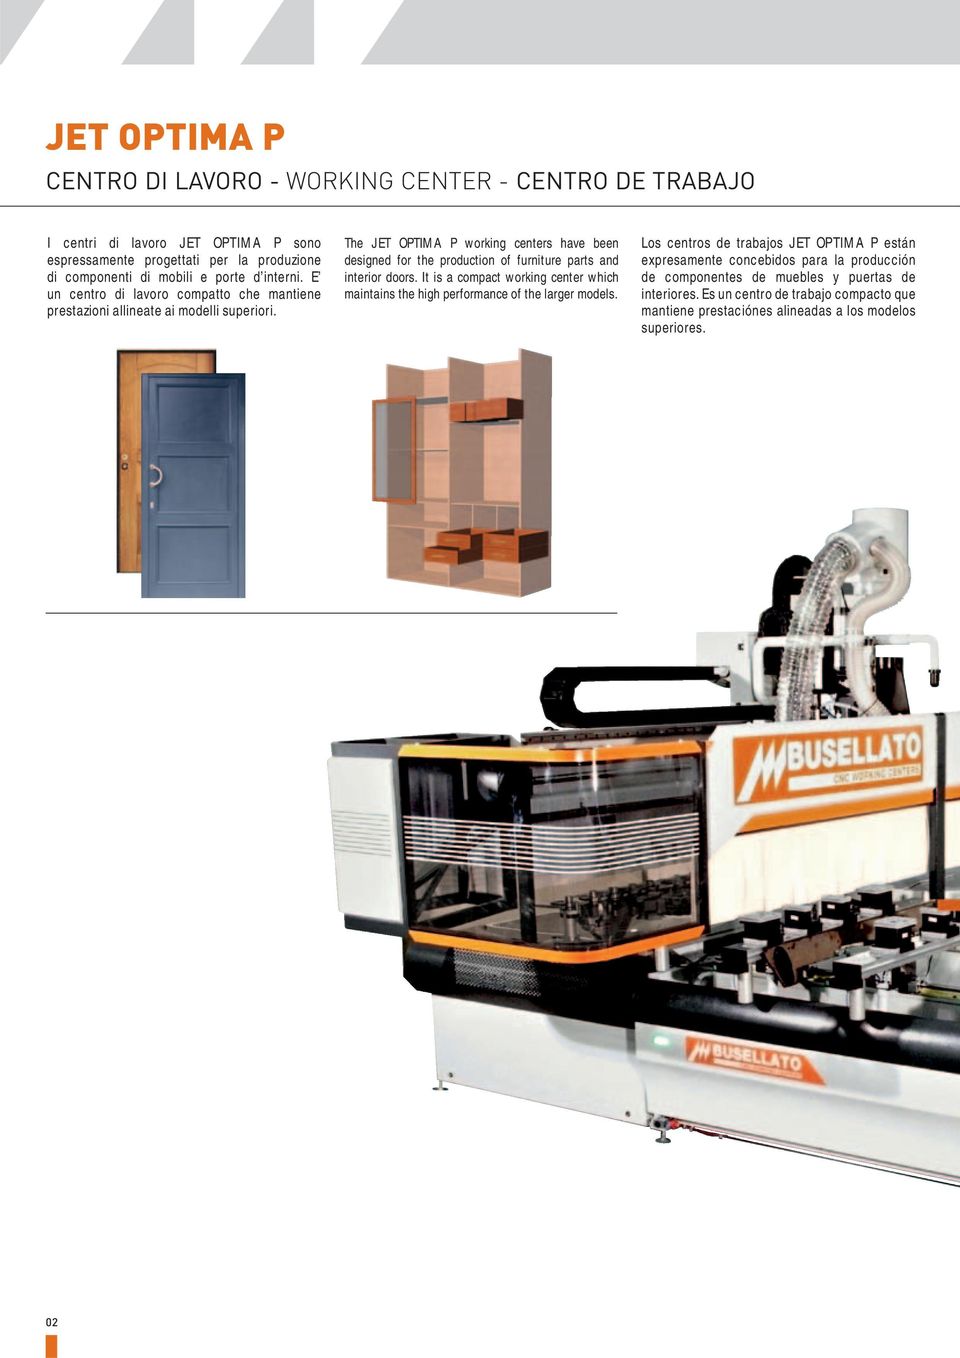 The JET OPTIMA P working centers have been designed for the production of furniture parts and interior doors.